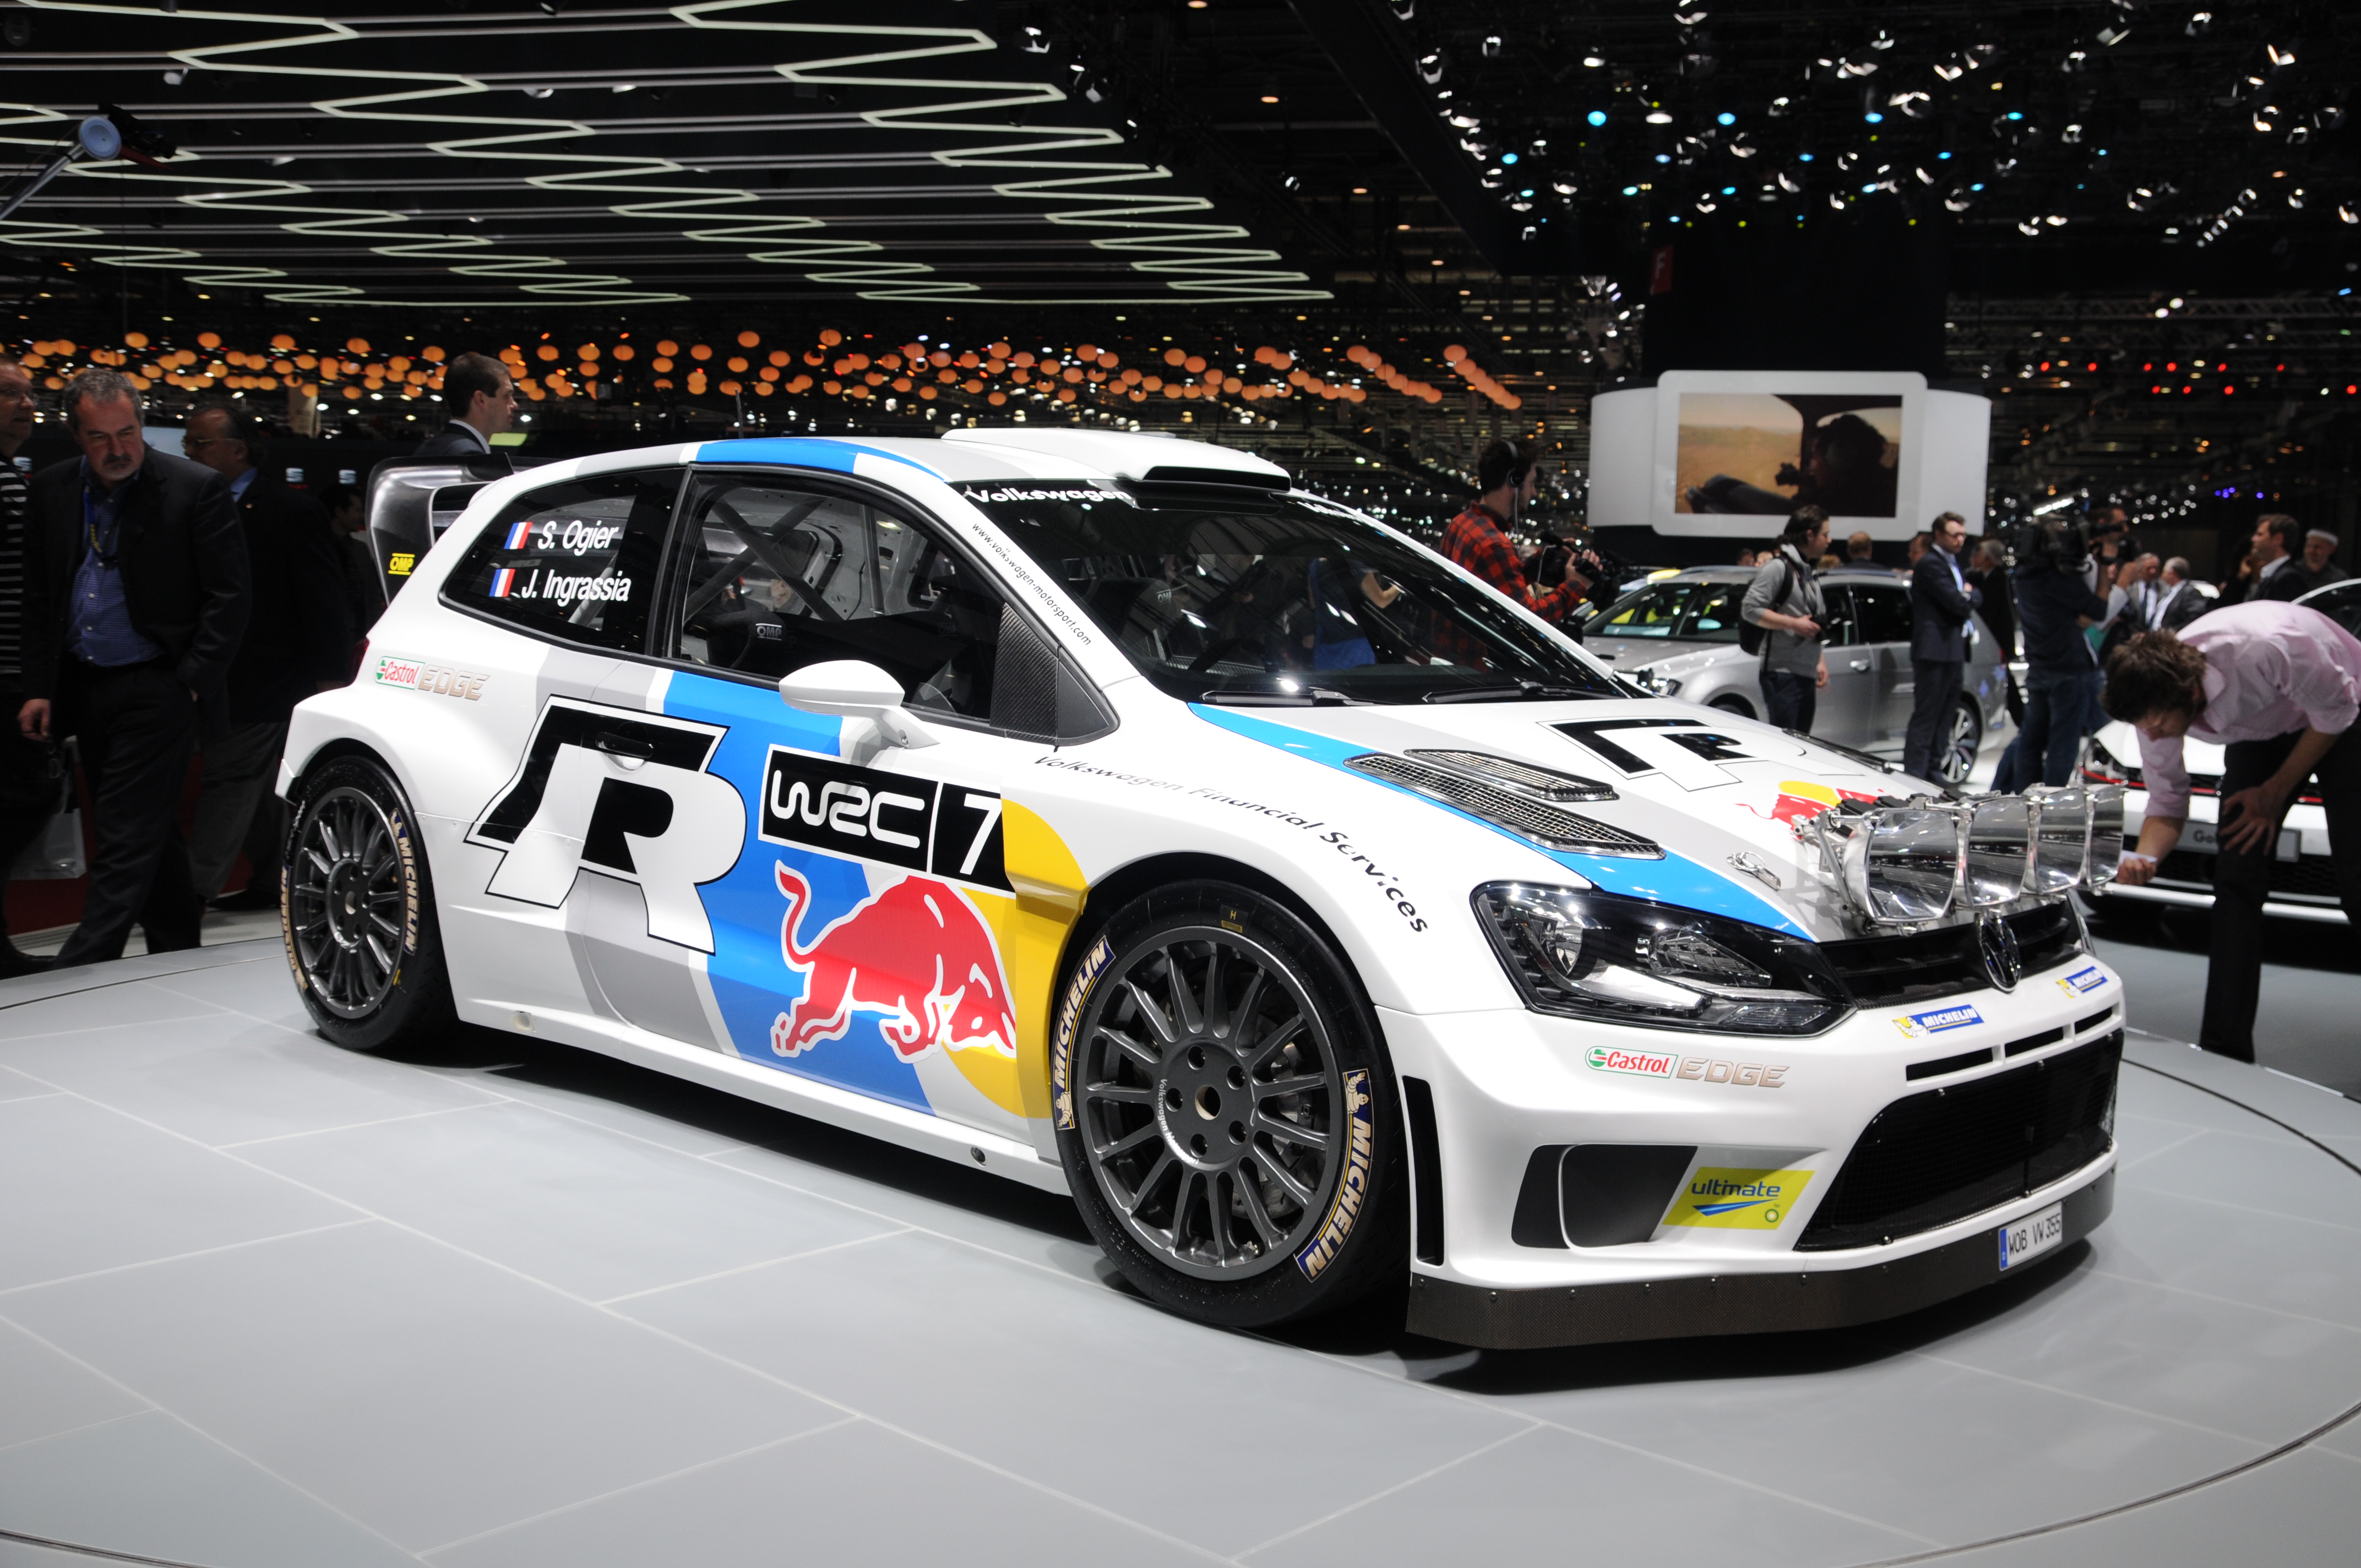 2013 Volkswagen Polo Wrc High Quality Background on Wallpapers Vista